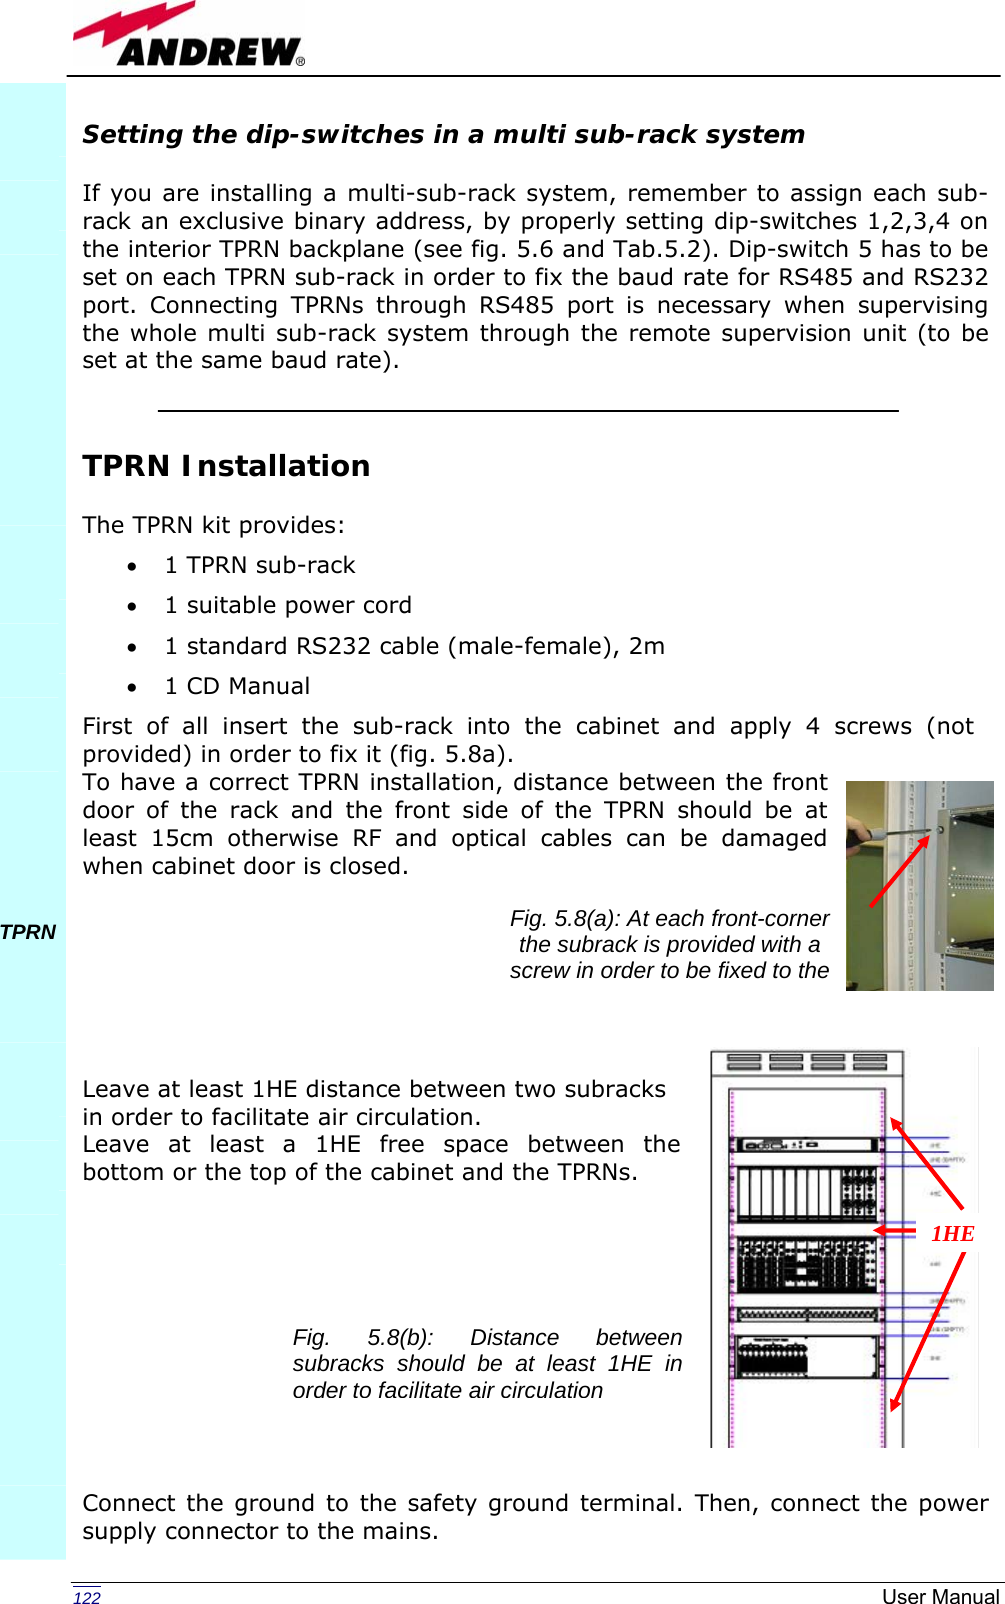   122  User ManualSetting the dip-switches in a multi sub-rack system  If you are installing a multi-sub-rack system, remember to assign each sub-rack an exclusive binary address, by properly setting dip-switches 1,2,3,4 on the interior TPRN backplane (see fig. 5.6 and Tab.5.2). Dip-switch 5 has to be set on each TPRN sub-rack in order to fix the baud rate for RS485 and RS232 port. Connecting TPRNs through RS485 port is necessary when supervising the whole multi sub-rack system through the remote supervision unit (to be set at the same baud rate).   TPRN Installation  The TPRN kit provides: • 1 TPRN sub-rack  • 1 suitable power cord  • 1 standard RS232 cable (male-female), 2m • 1 CD Manual First of all insert the sub-rack into the cabinet and apply 4 screws (not provided) in order to fix it (fig. 5.8a). To have a correct TPRN installation, distance between the front door of the rack and the front side of the TPRN should be at least 15cm otherwise RF and optical cables can be damaged when cabinet door is closed.        Leave at least 1HE distance between two subracks  in order to facilitate air circulation. Leave at least a 1HE free space between the bottom or the top of the cabinet and the TPRNs.            Connect the ground to the safety ground terminal. Then, connect the power supply connector to the mains.            TPRN         Fig. 5.8(a): At each front-corner the subrack is provided with a screw in order to be fixed to the 1HE Fig. 5.8(b): Distance between subracks should be at least 1HE in order to facilitate air circulation